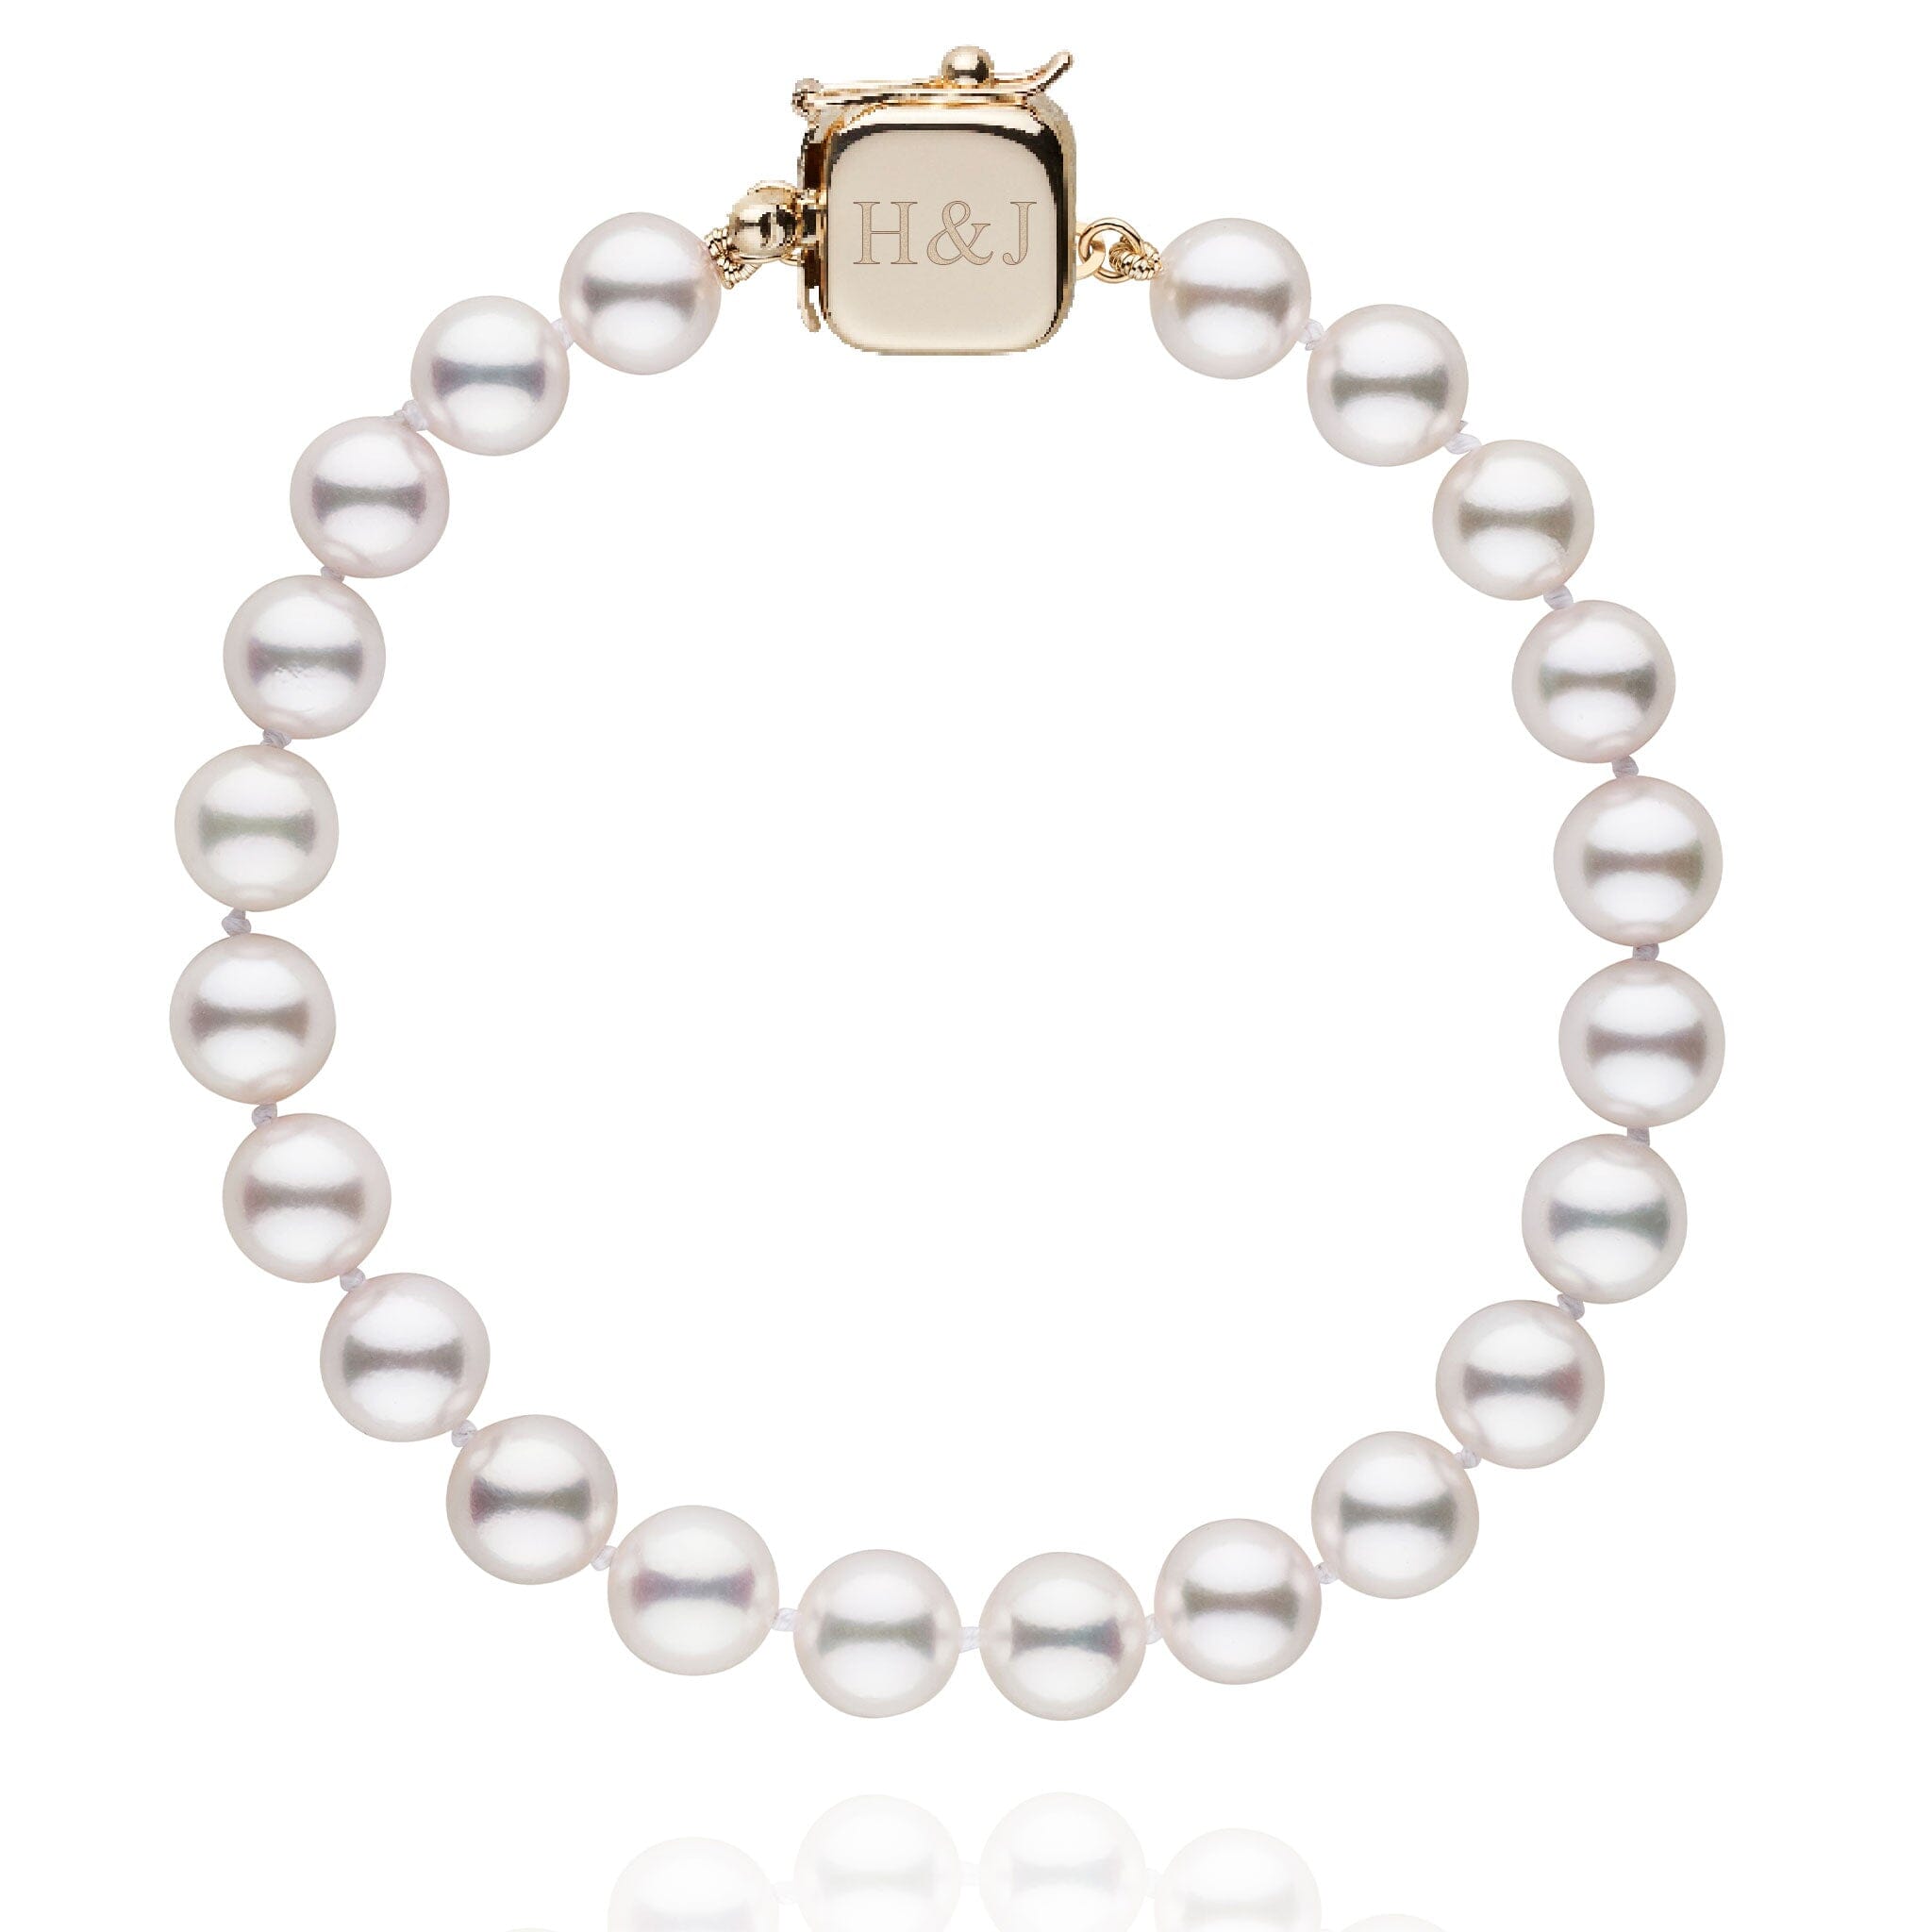 Personalized 7.0-7.5 mm AAA Akoya Pearl Square Clasp Bracelet